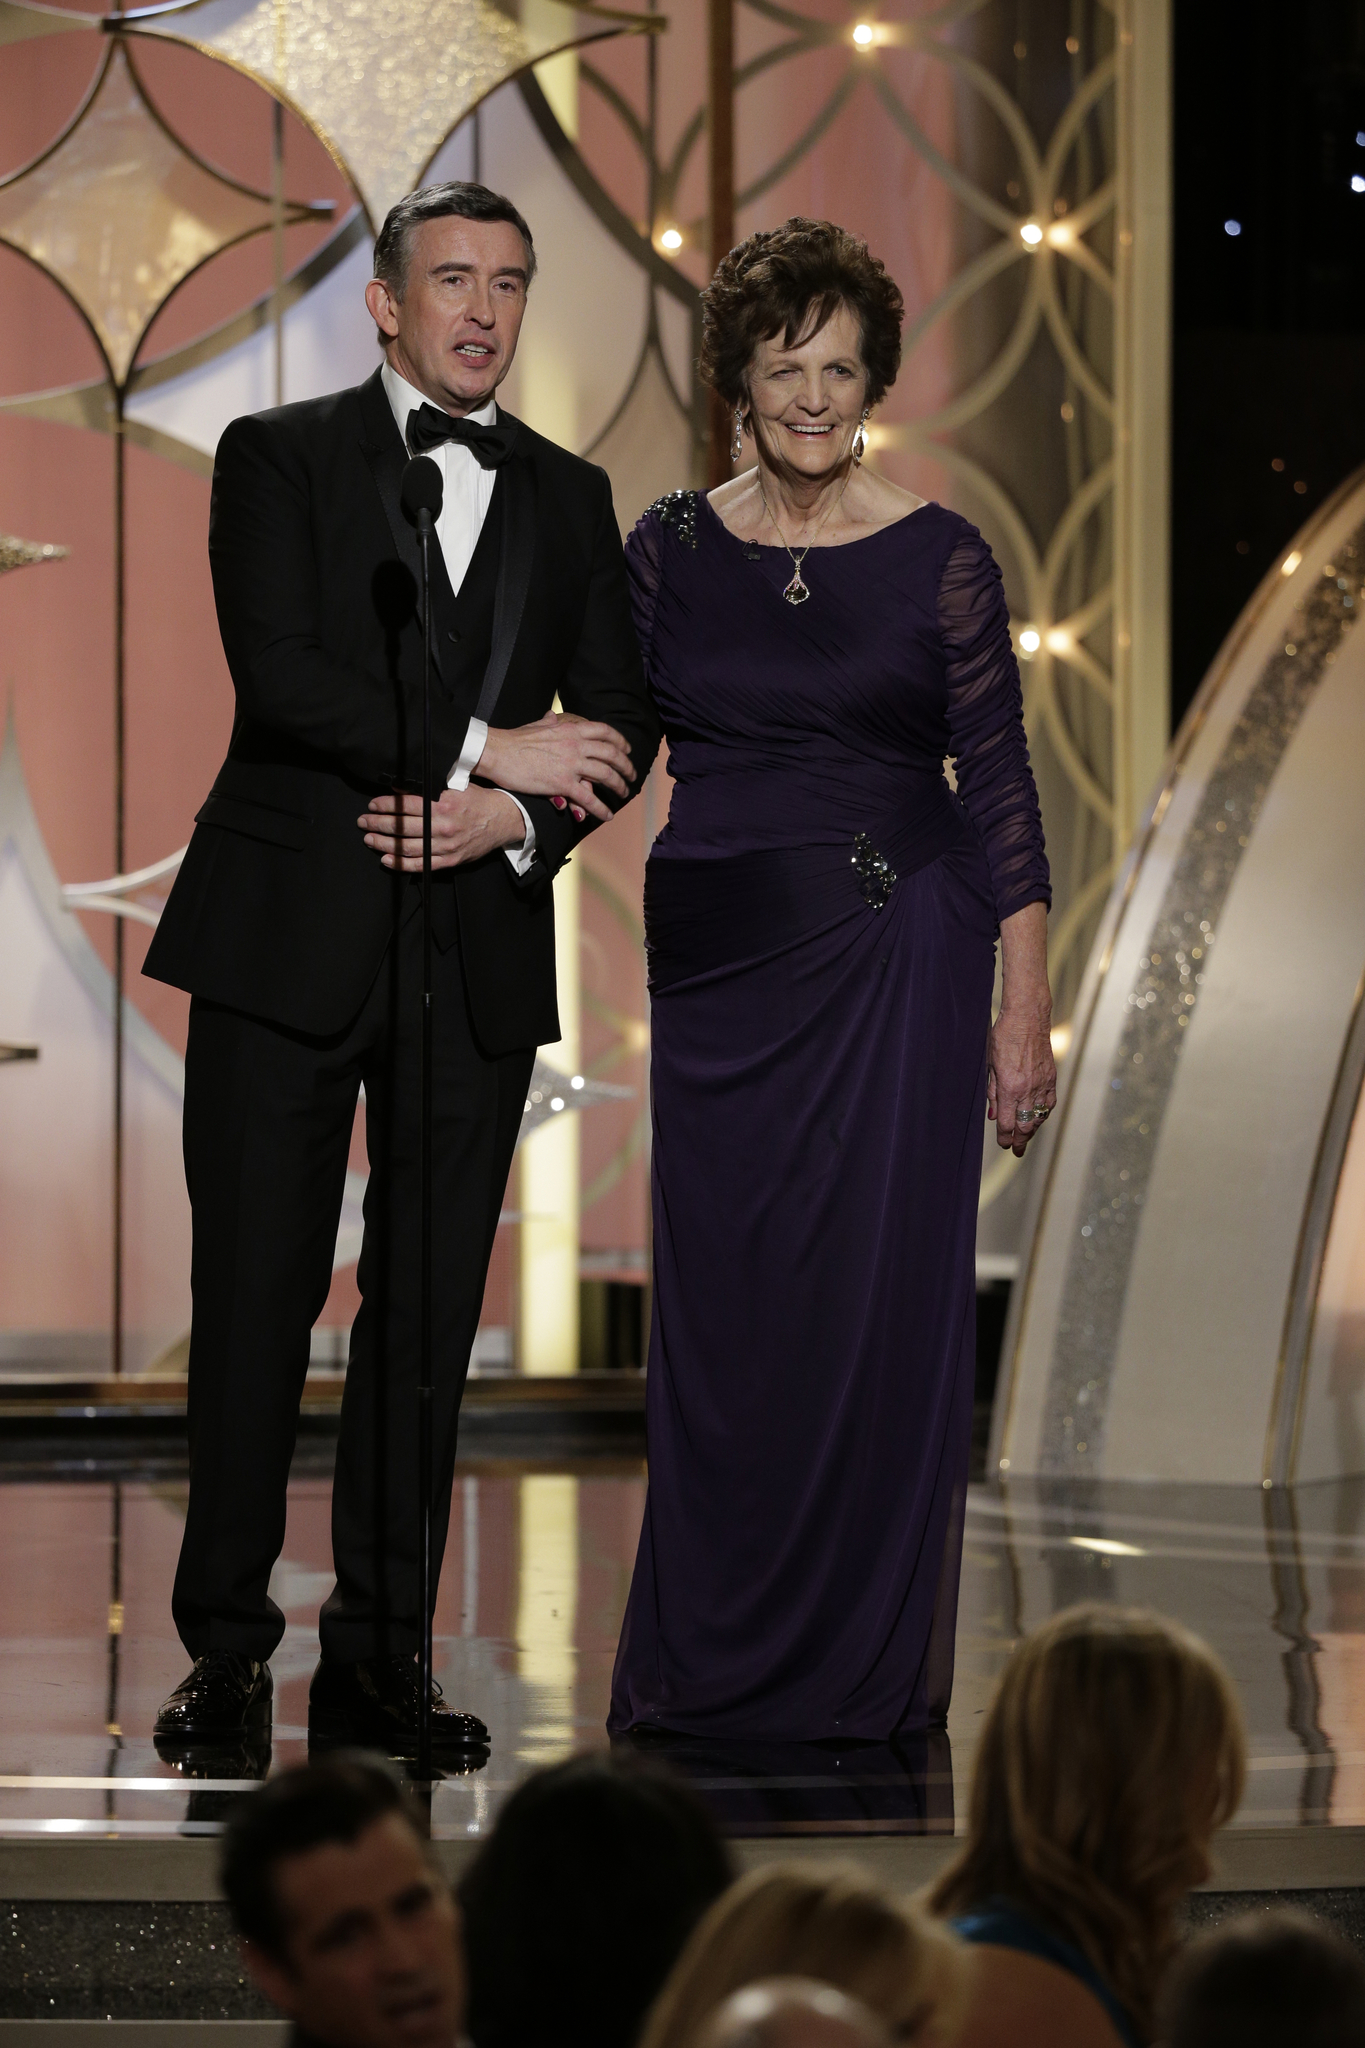 Steve Coogan and Philomena Lee at event of 71st Golden Globe Awards (2014)